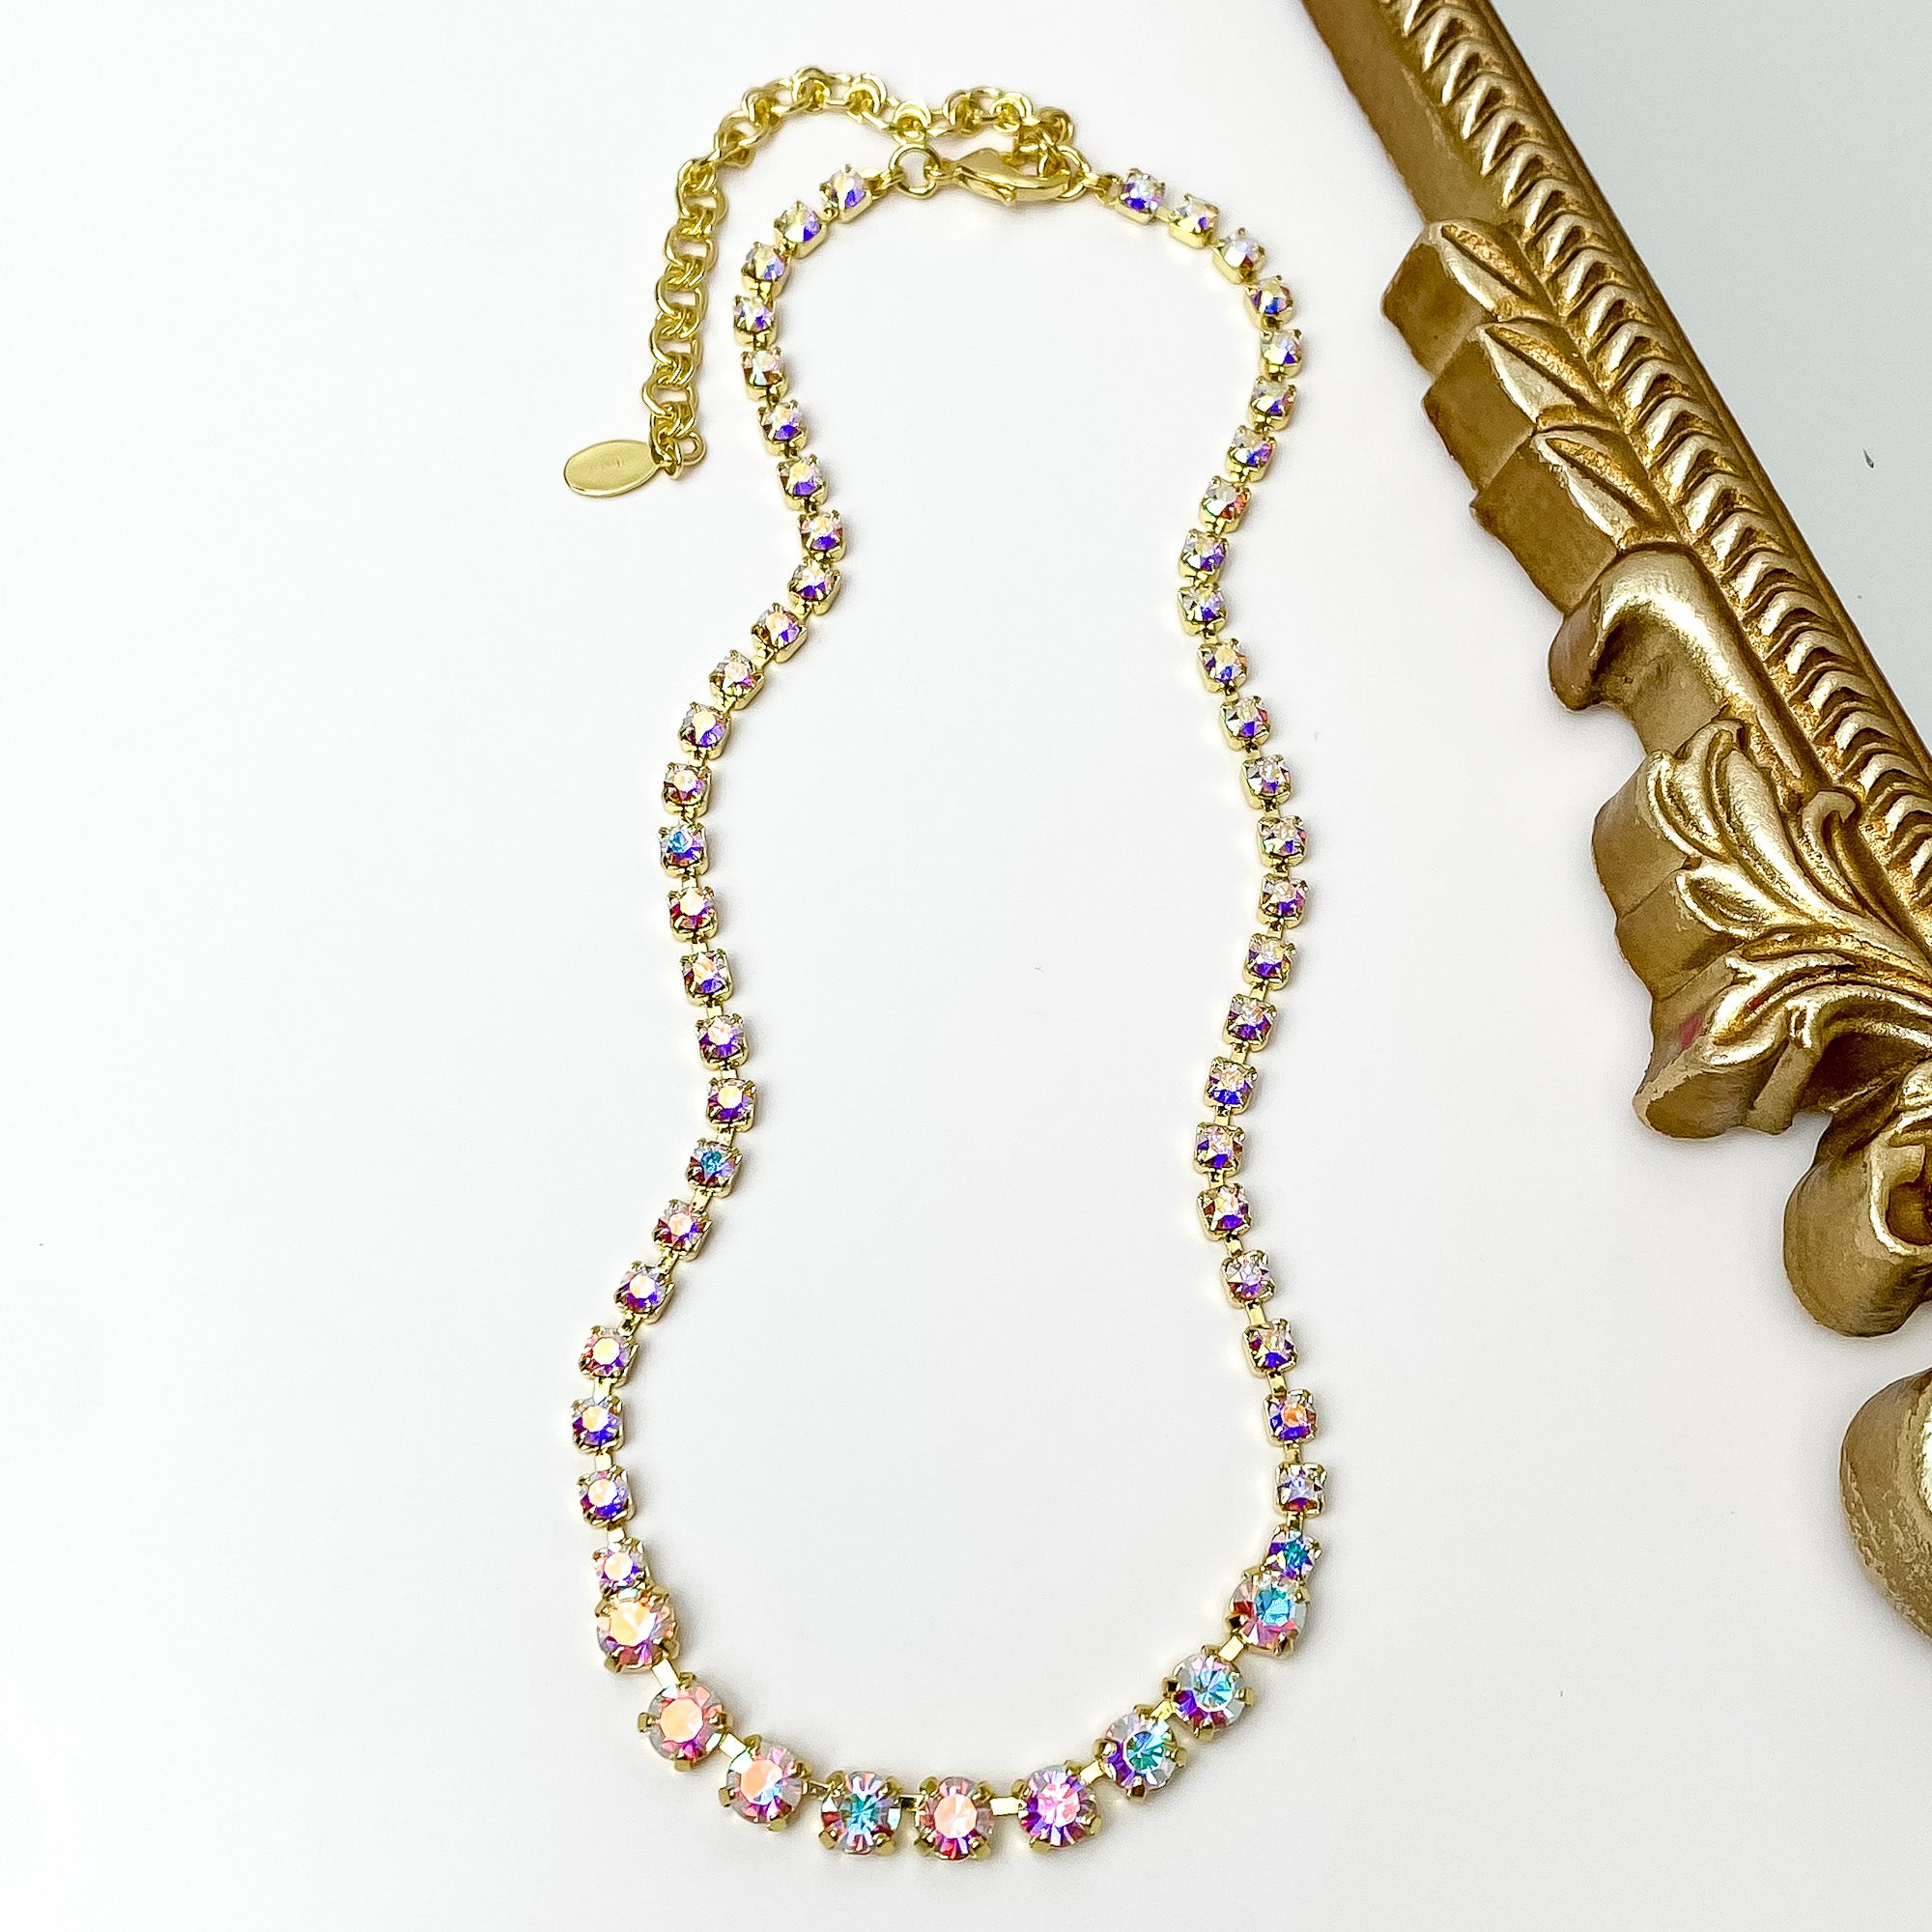 Pictured is a gold necklace with ab crystals. This necklace is pictured on a white background with a gold mirror on the right side.